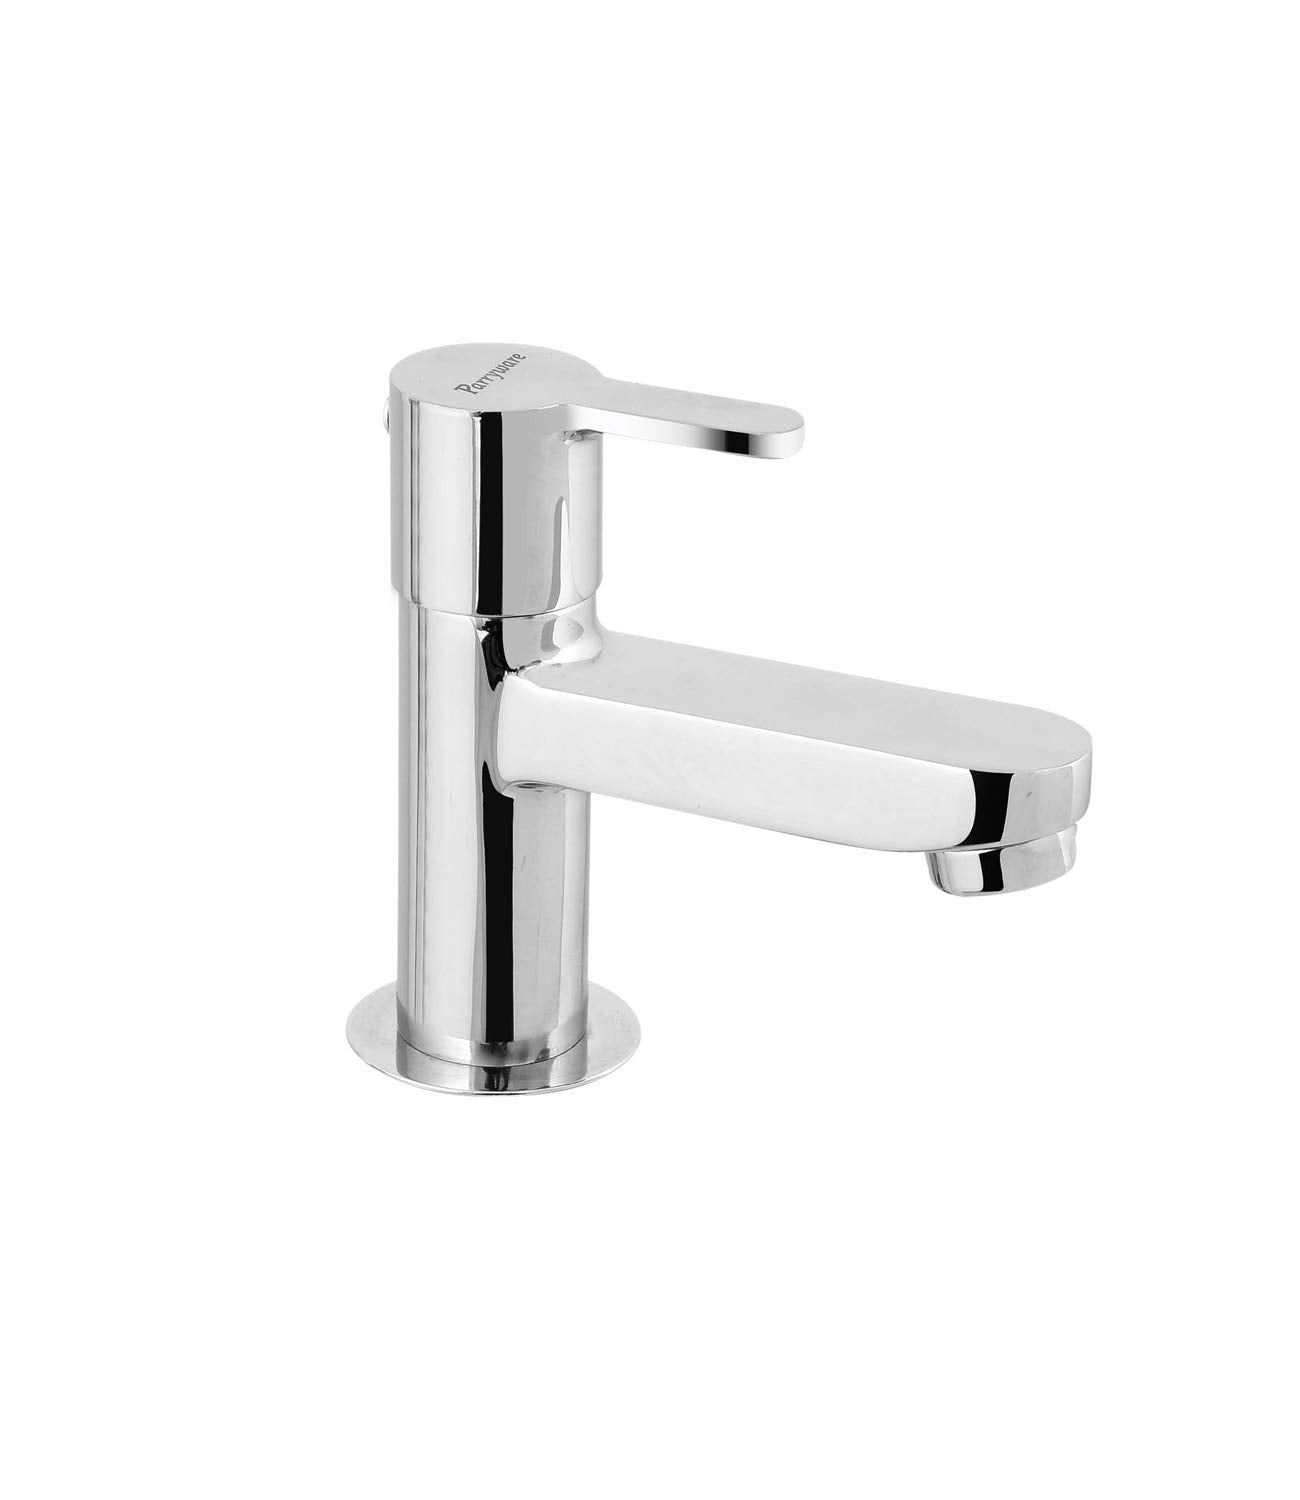 Parryware Claret Pillar Cock with Chrome Finish only Cold Water Set of 1-Taps & Dies-dealsplant